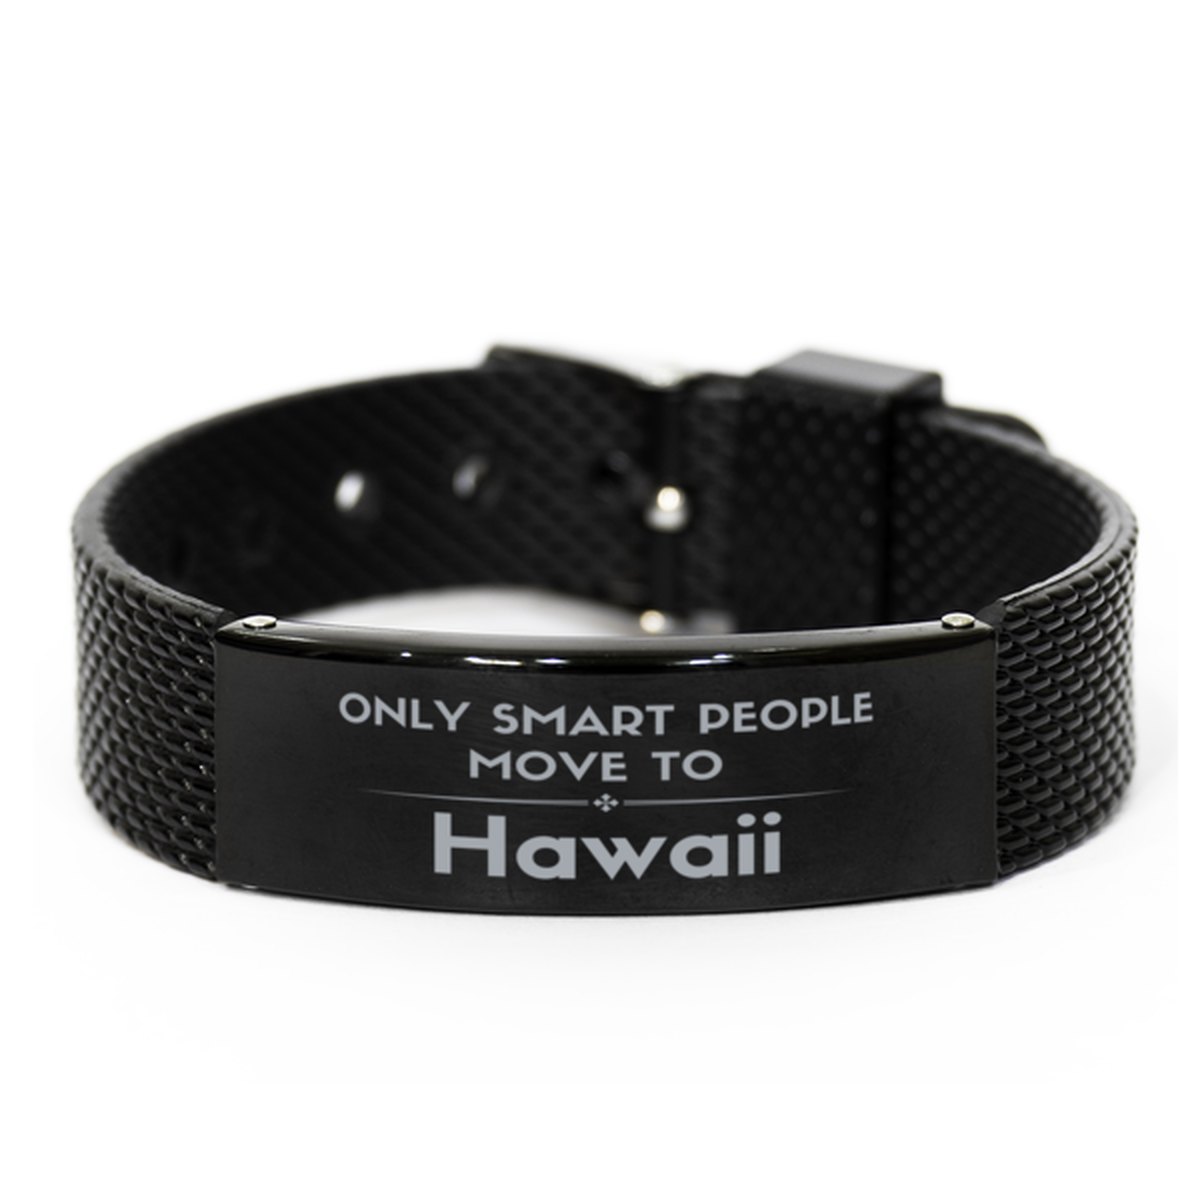 Only smart people move to Hawaii Black Shark Mesh Bracelet, Gag Gifts For Hawaii, Move to Hawaii Gifts for Friends Coworker Funny Saying Quote